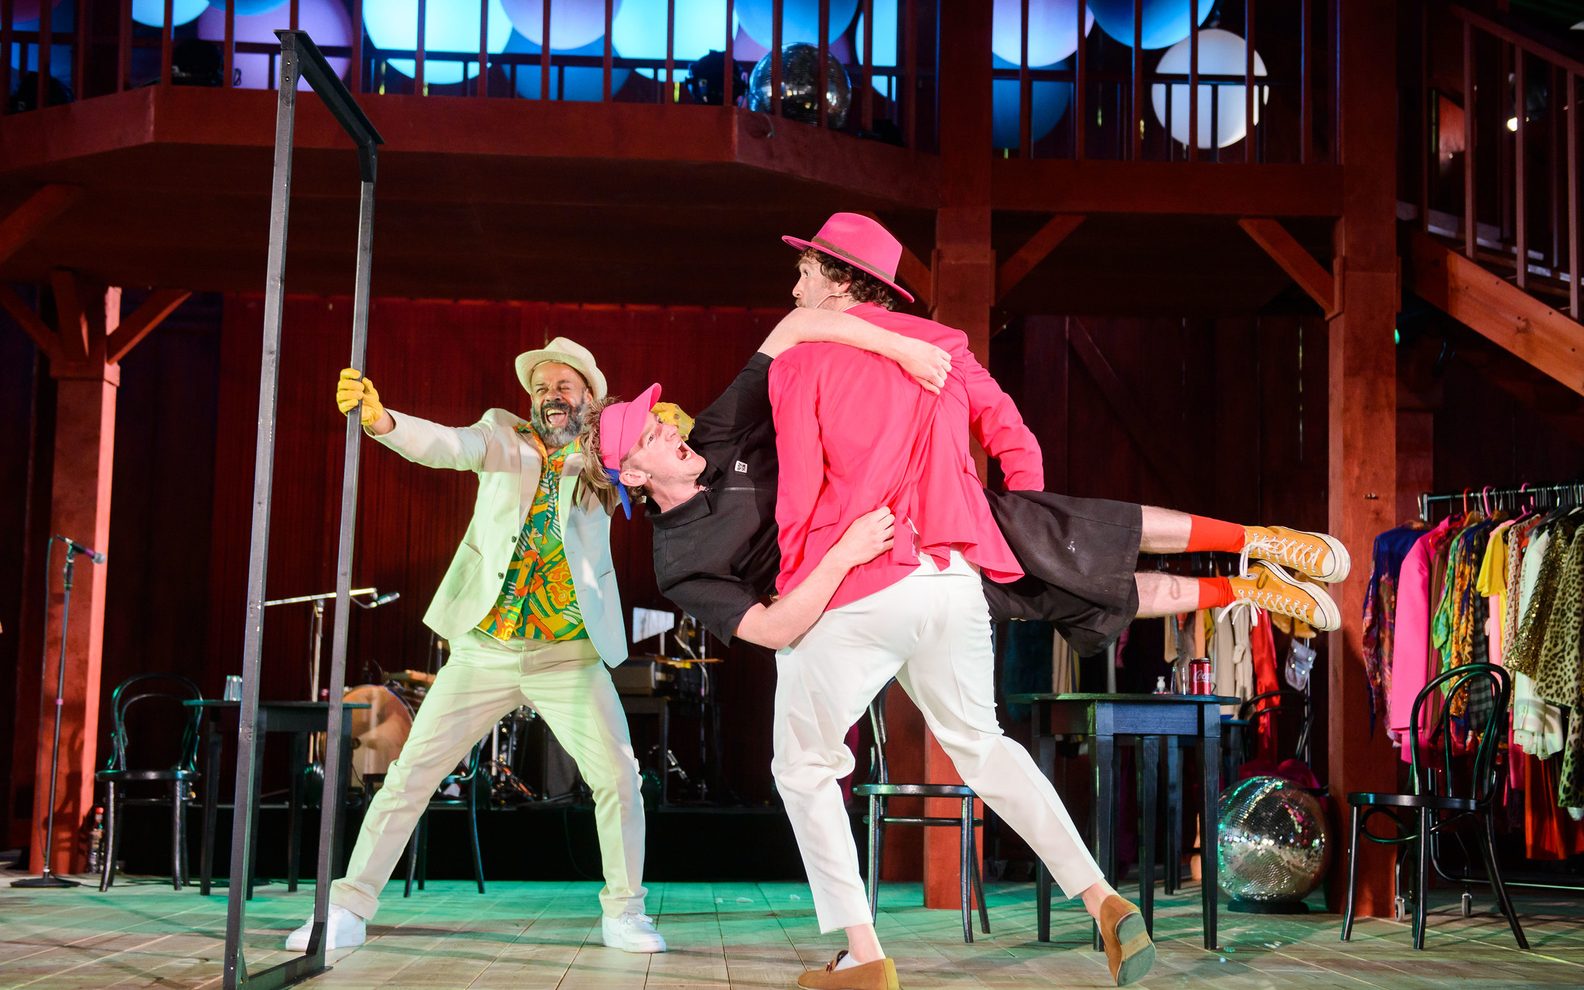 A theatrical production. Three men in bright clothes are on stage. One is holding a door frame while another is holding the third man horizontally and walking towards the frame.